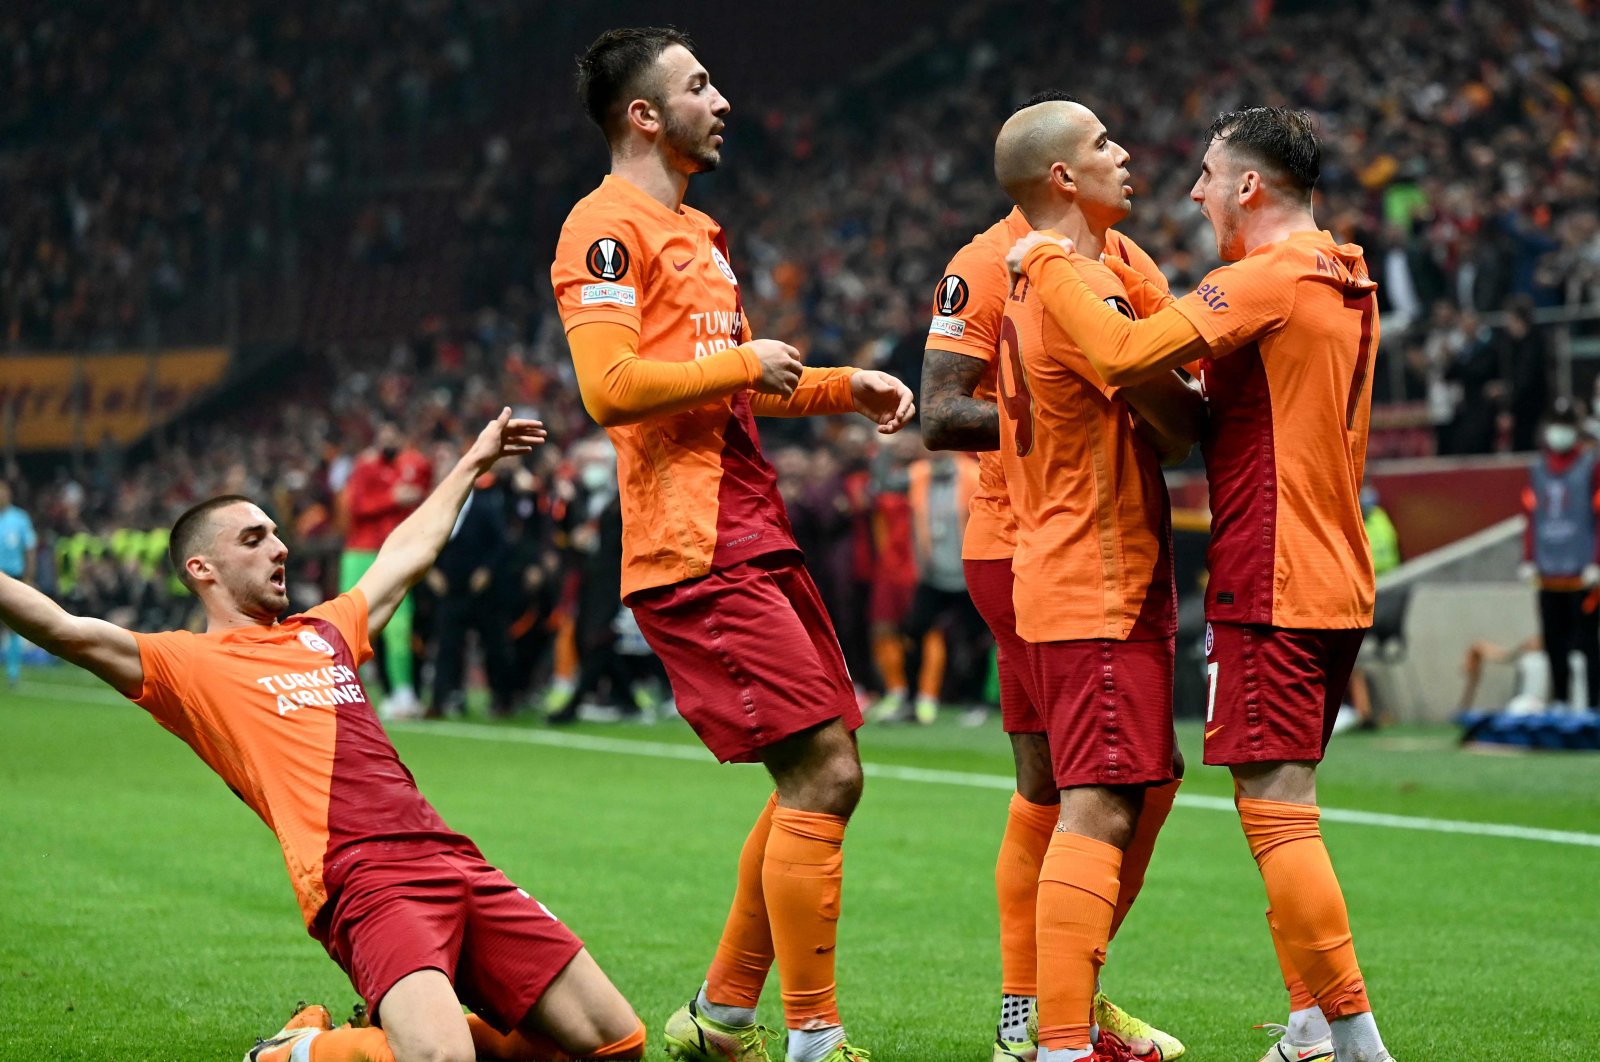 Galatasaray players celebrate a goal during the UEFA Europa League match against Lokomotiv Moscow at the Nef Stadium in Istanbul, Turkey, Nov. 4, 2021. (AFP Photo)